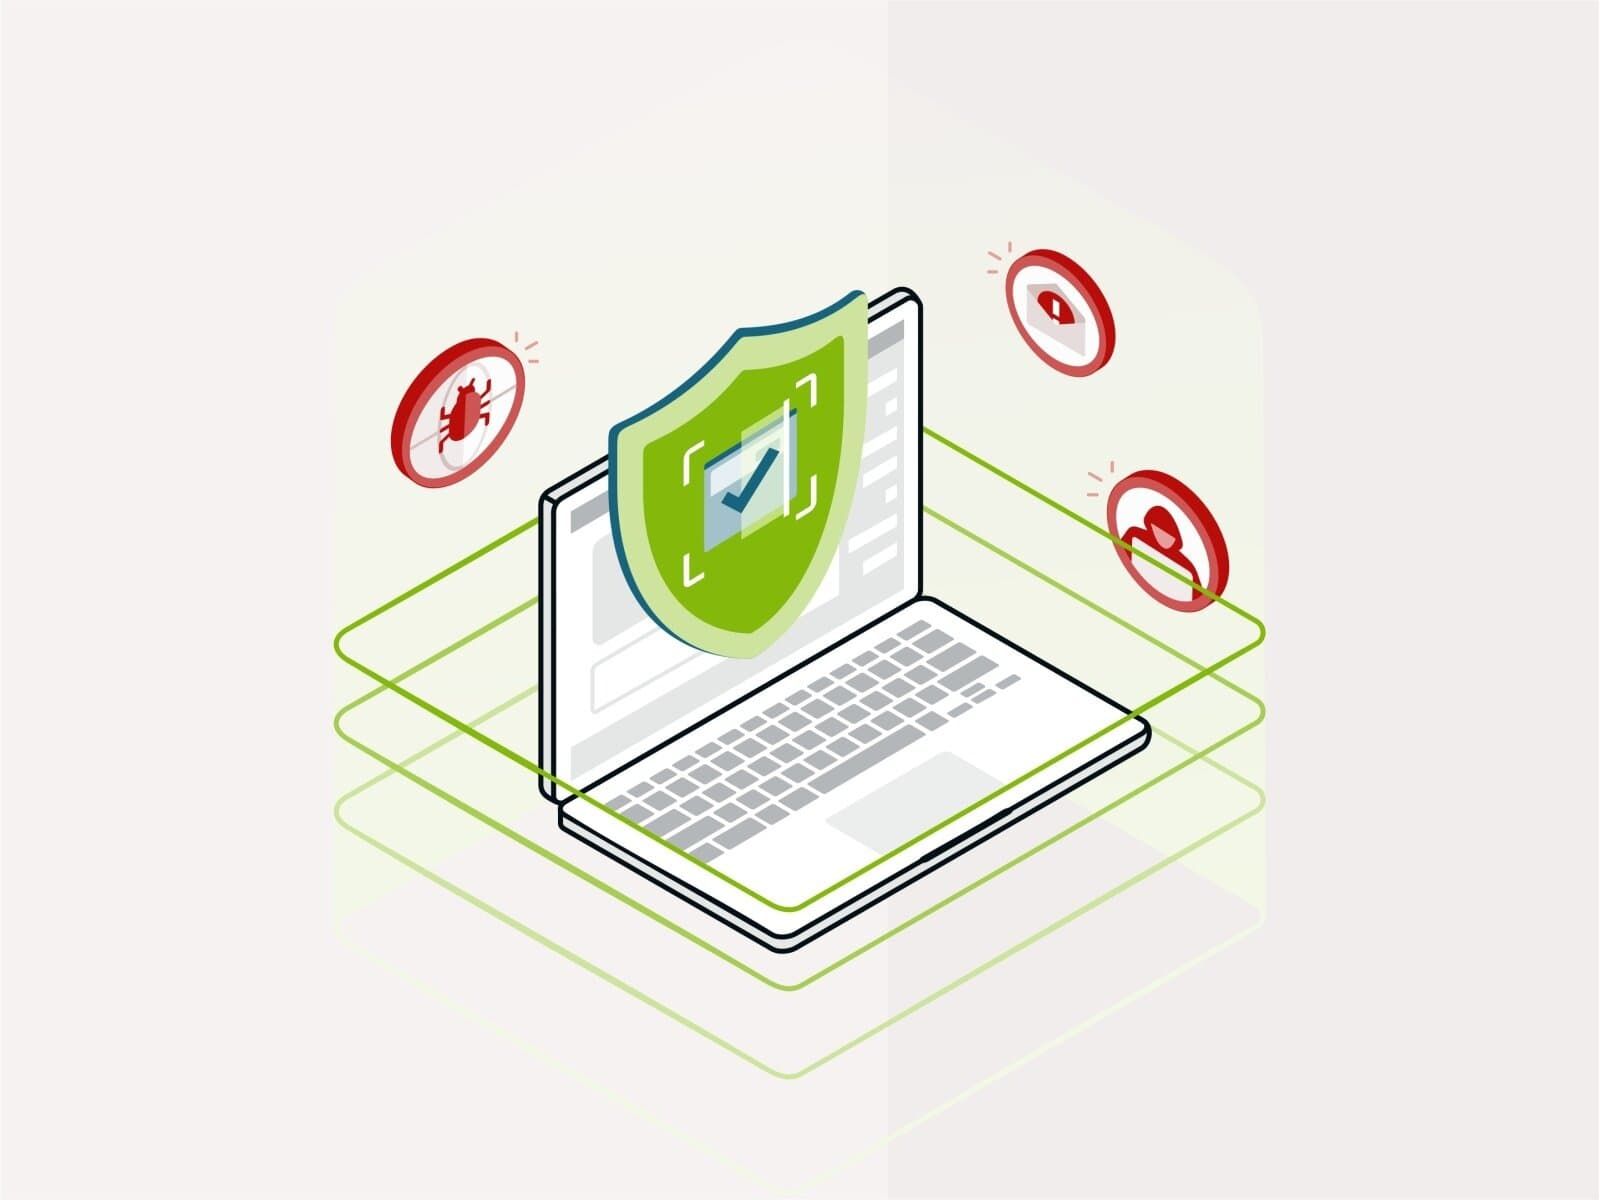 Security is of high importance for CRM software development (*image by [Aleksandar Savic](https://dribbble.com/almigor){ rel="nofollow" target="_blank" .default-md}*)